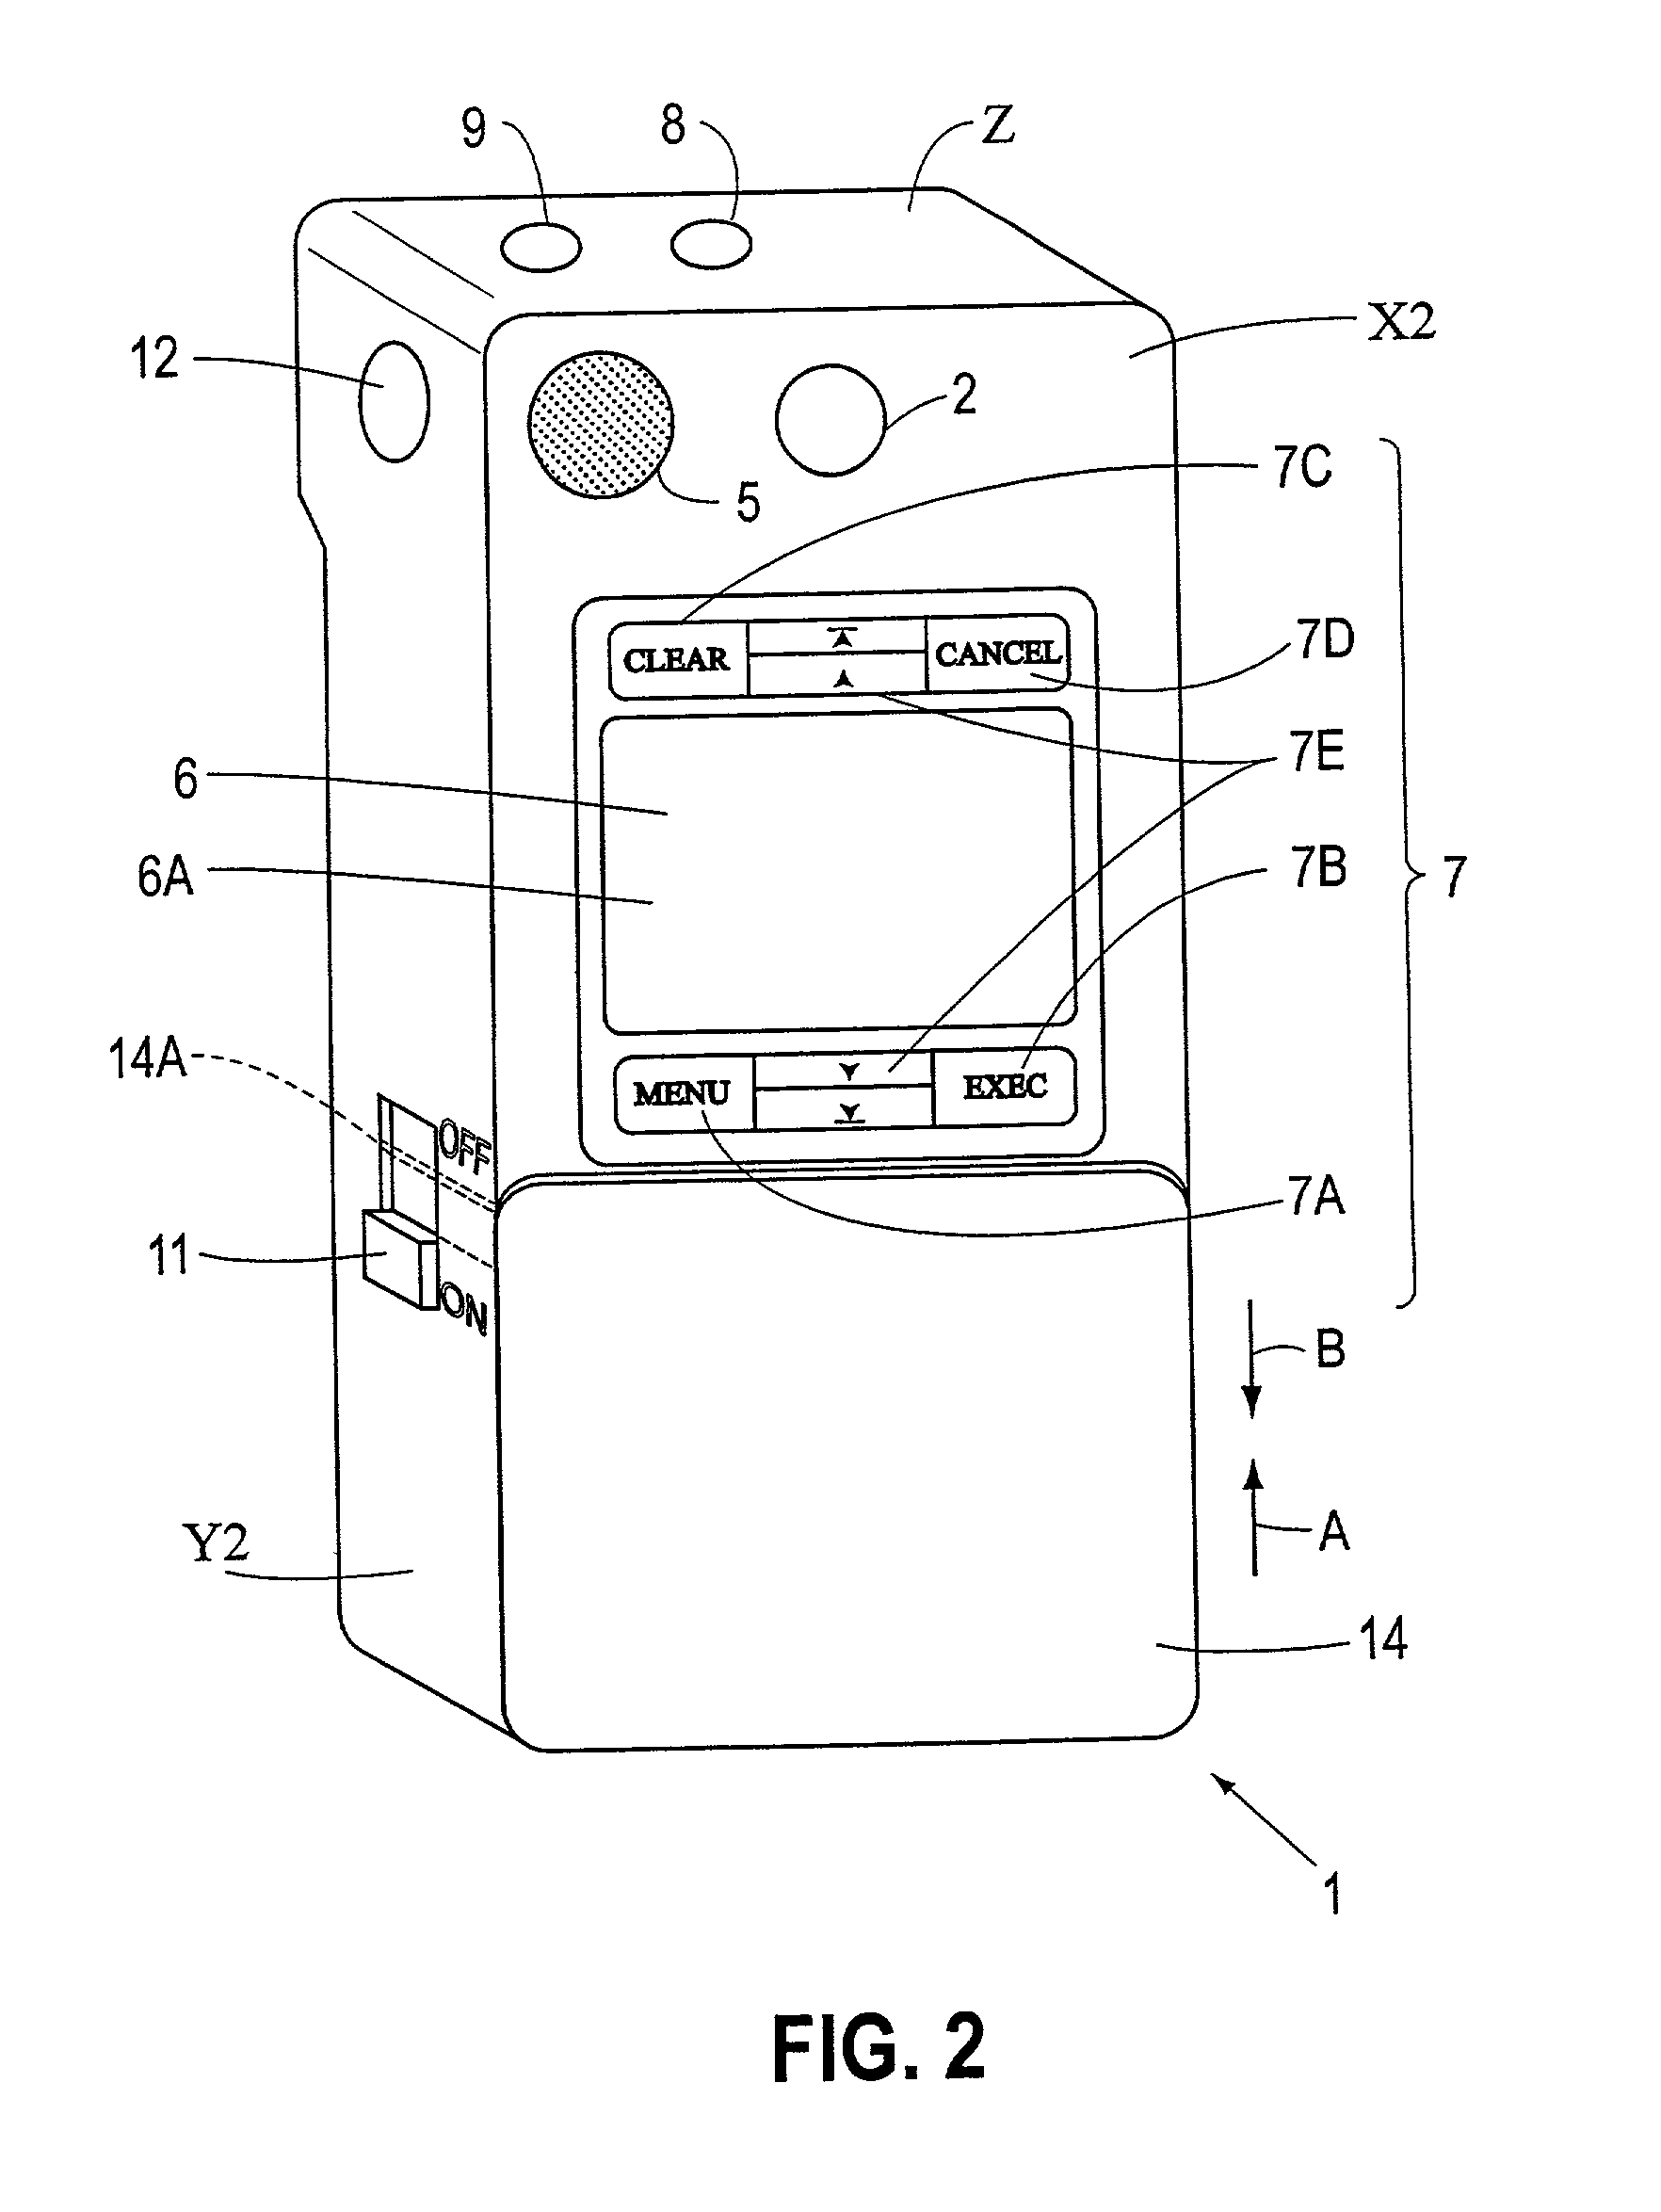 Digital camera including a zoom button and/or a touch tablet useable for performing a zoom operation